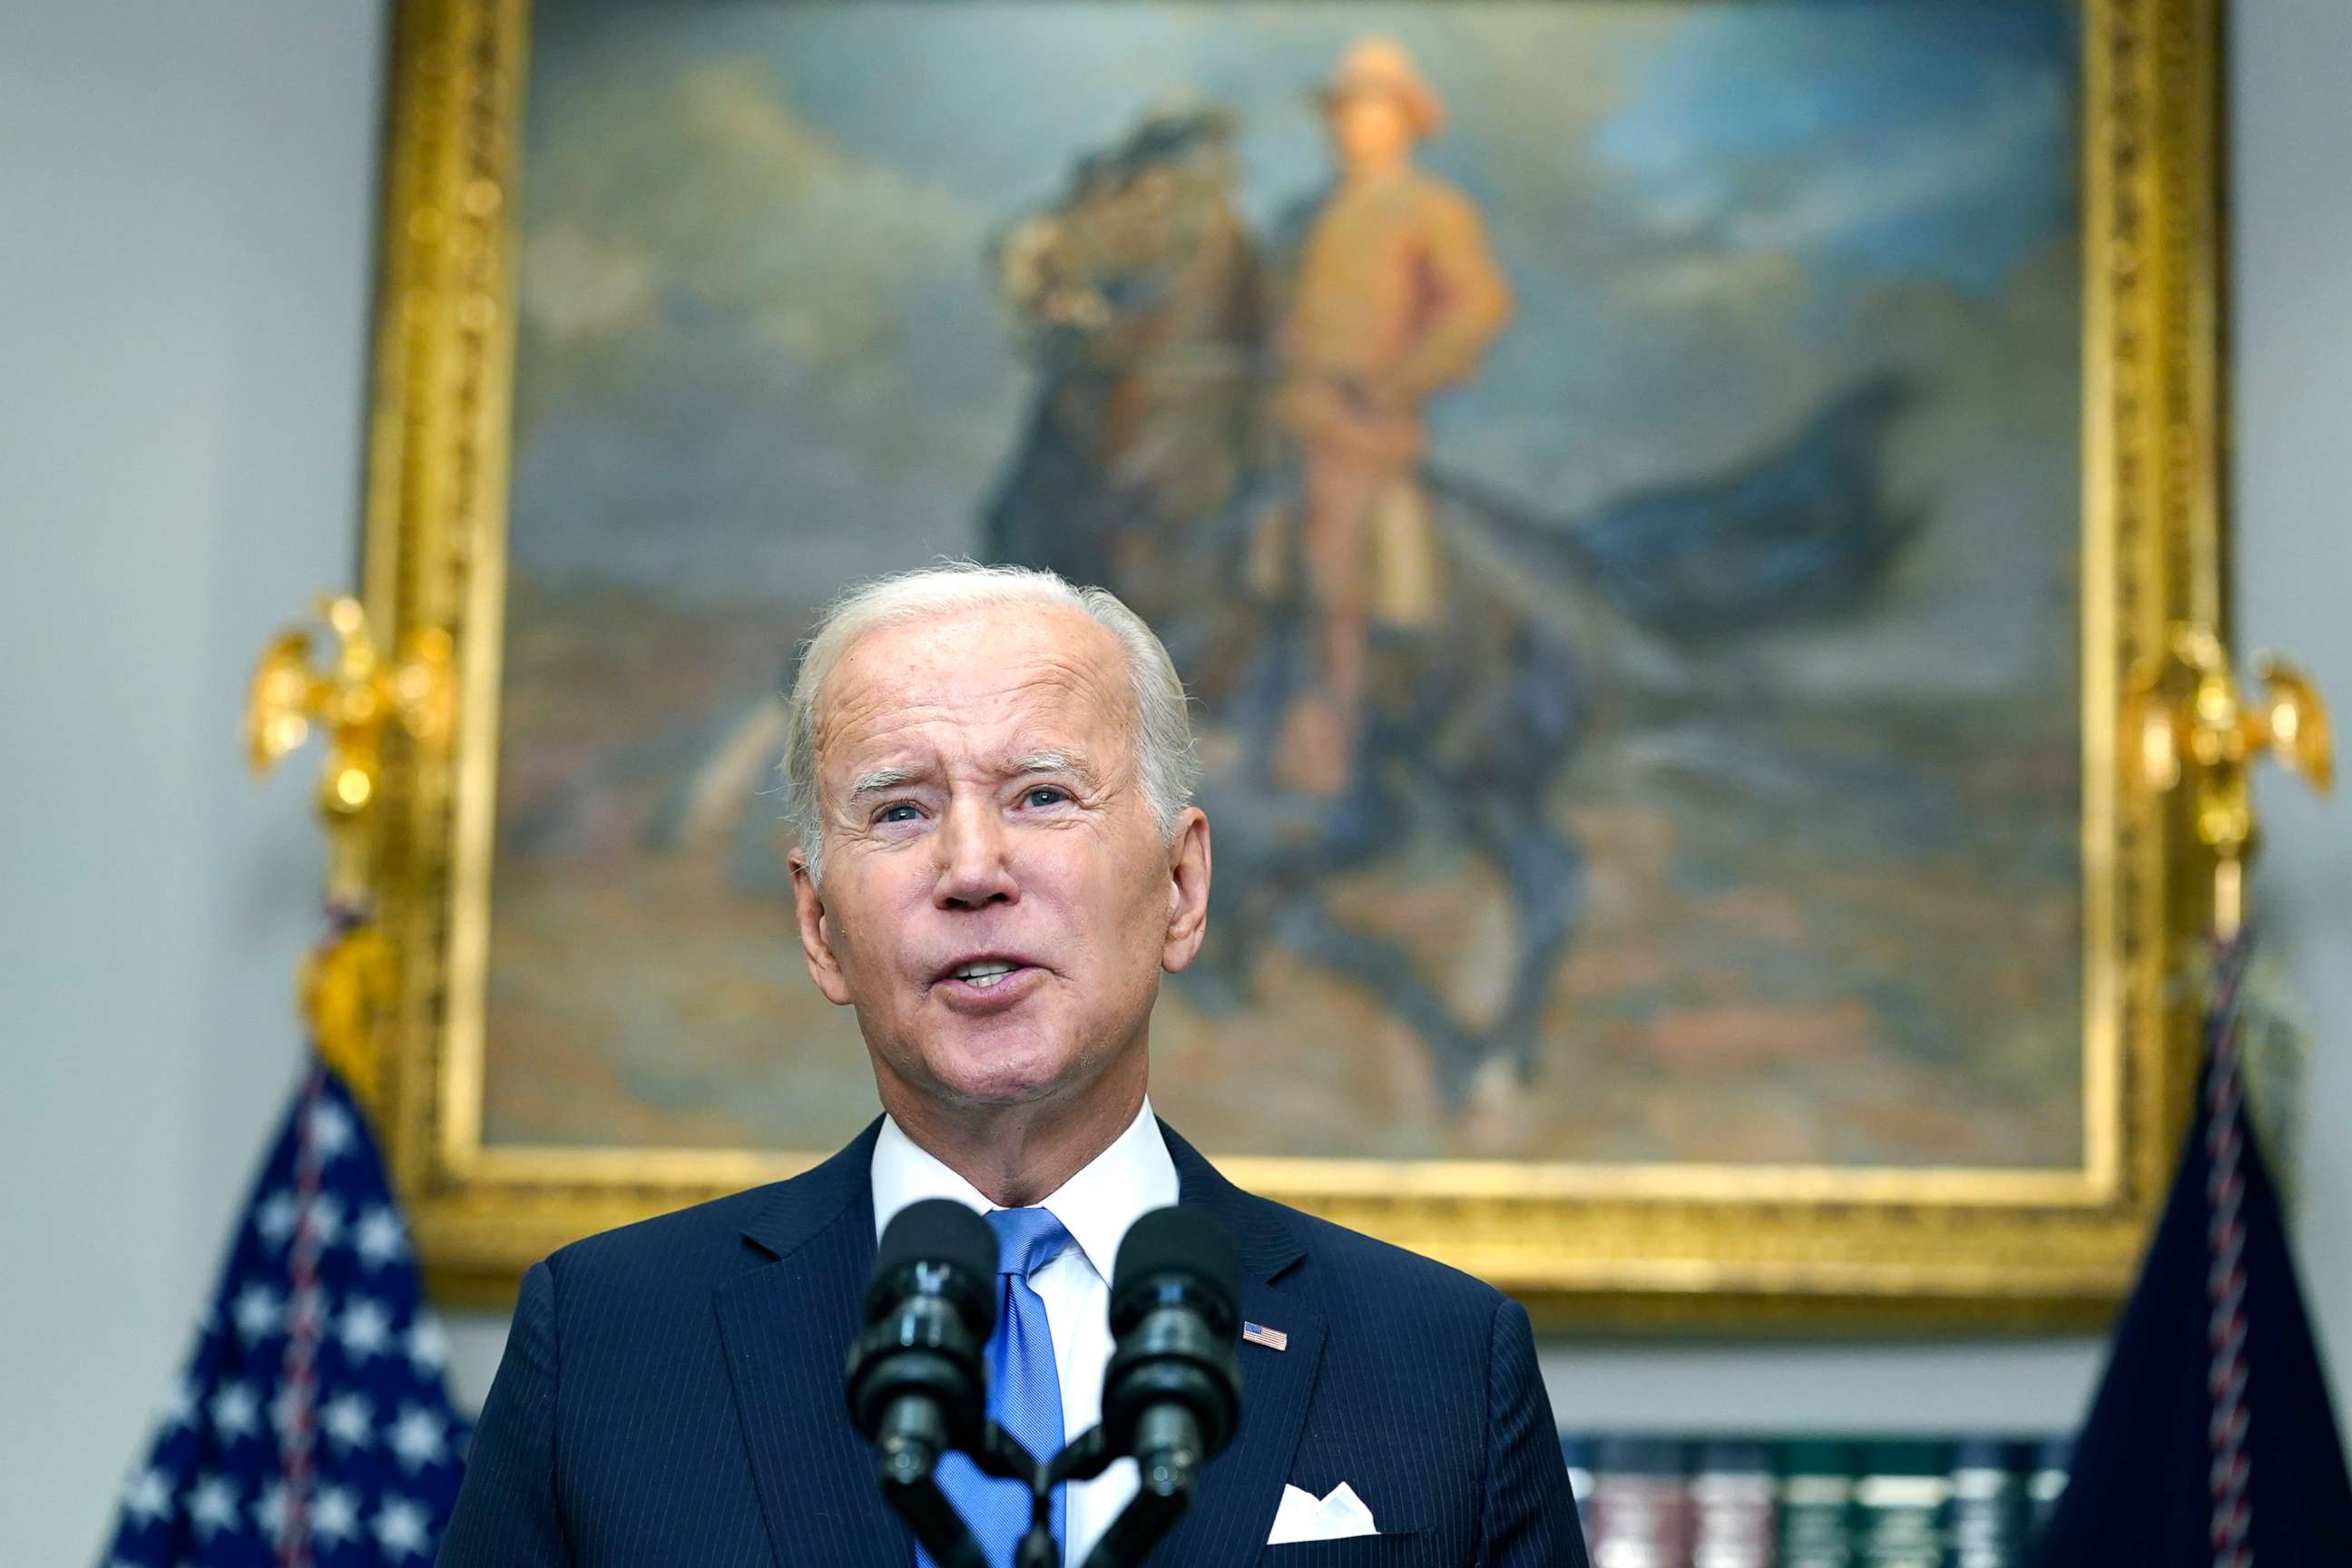 PHOTO: President Joe Biden speaks about the ongoing federal response efforts for Hurricane Ian from the Roosevelt Room at the White House, Sept. 30, 2022.